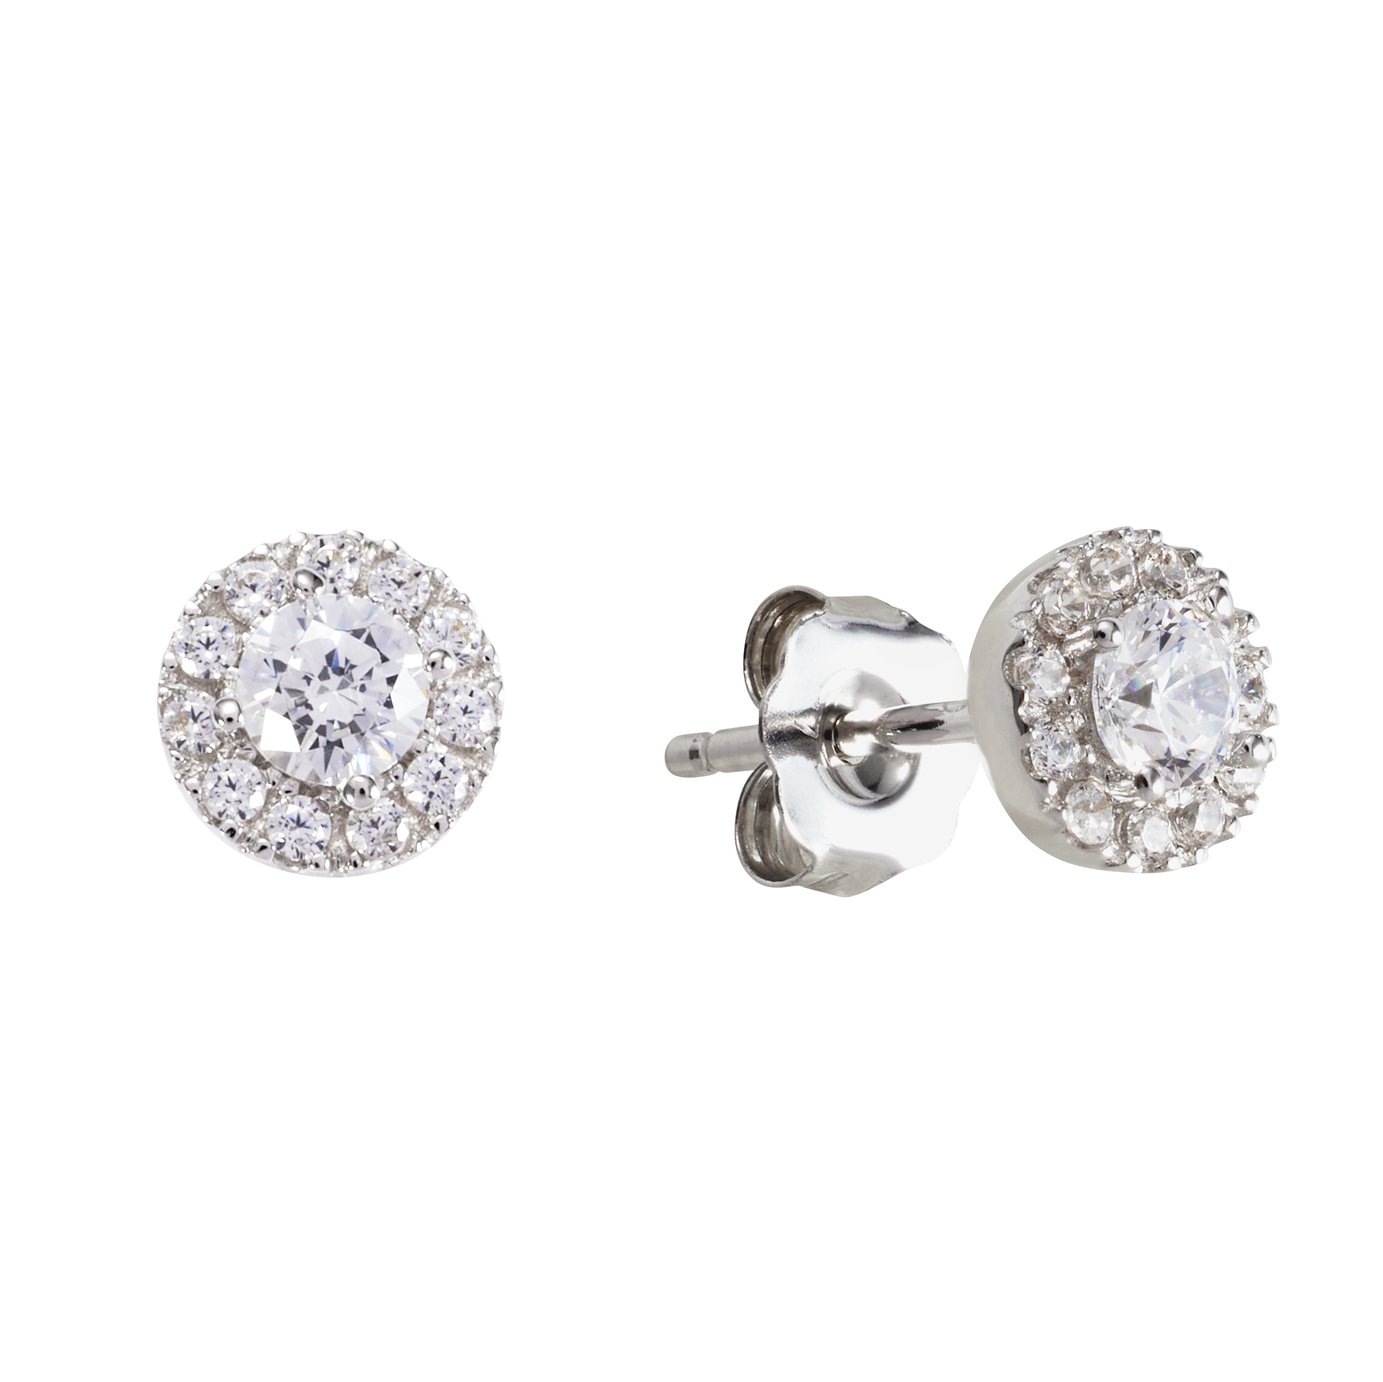 Revere 9ct White Gold Cubic Zirconia Halo Stud Earrings